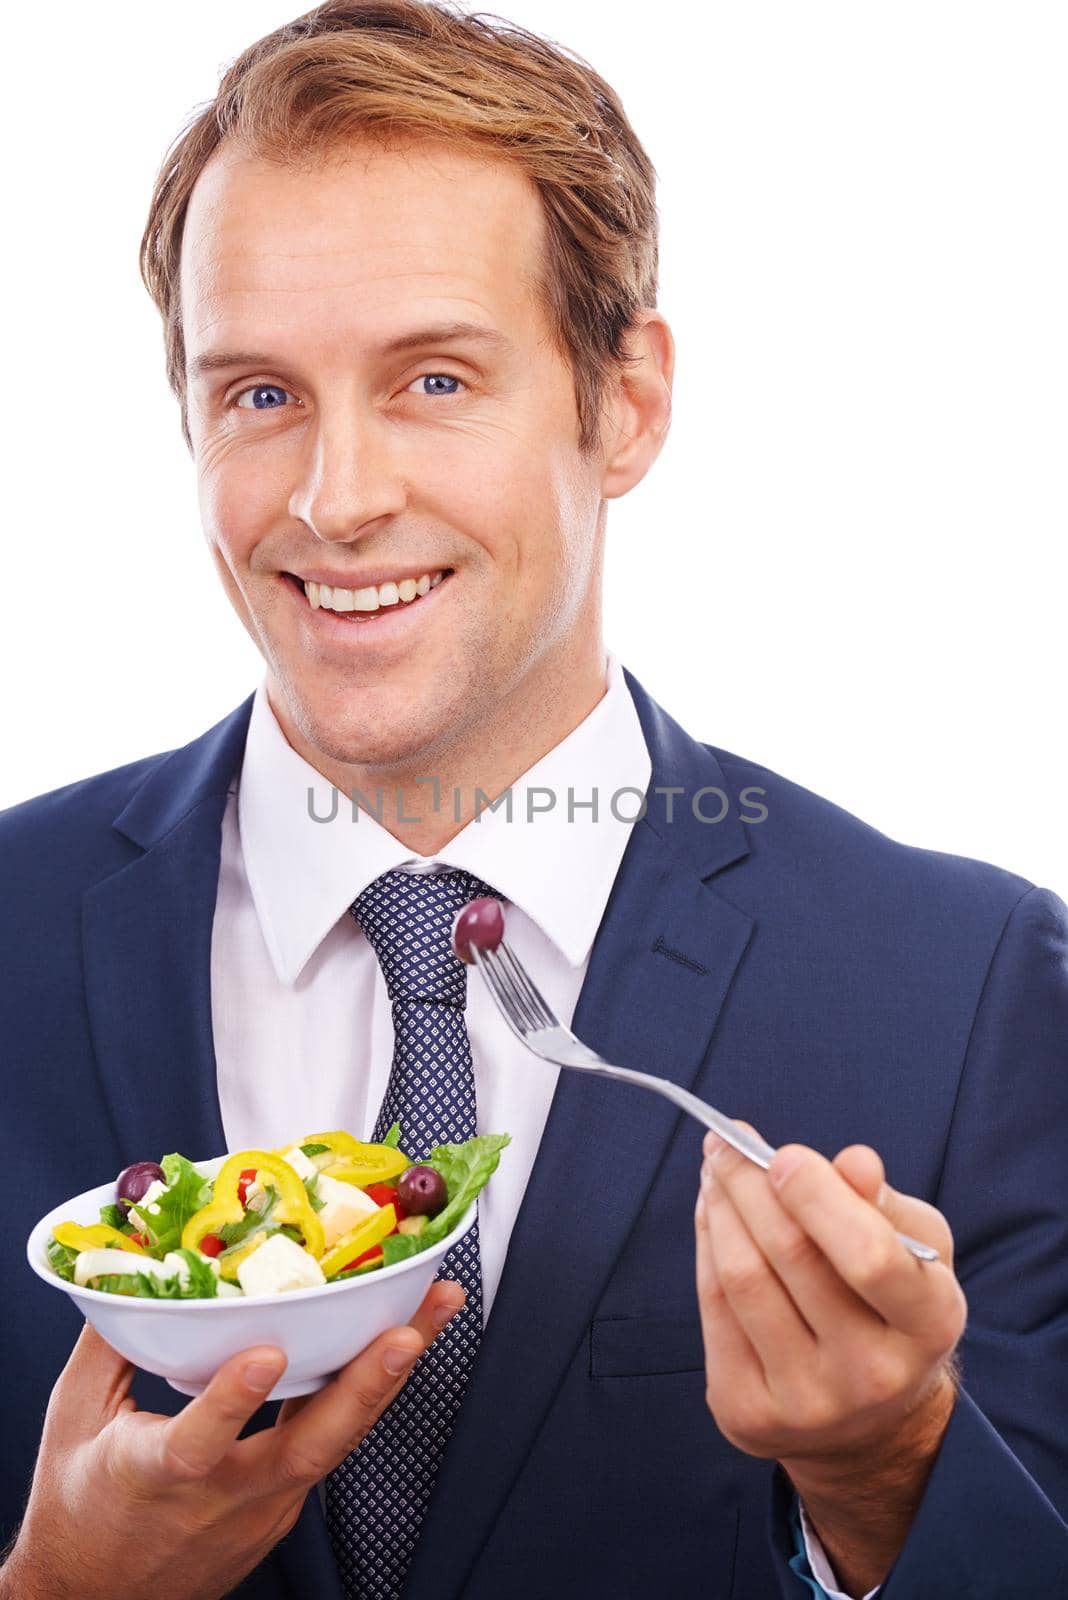 Getting it all for lunch. Portrait of a handsome young man eating salad isolated on white